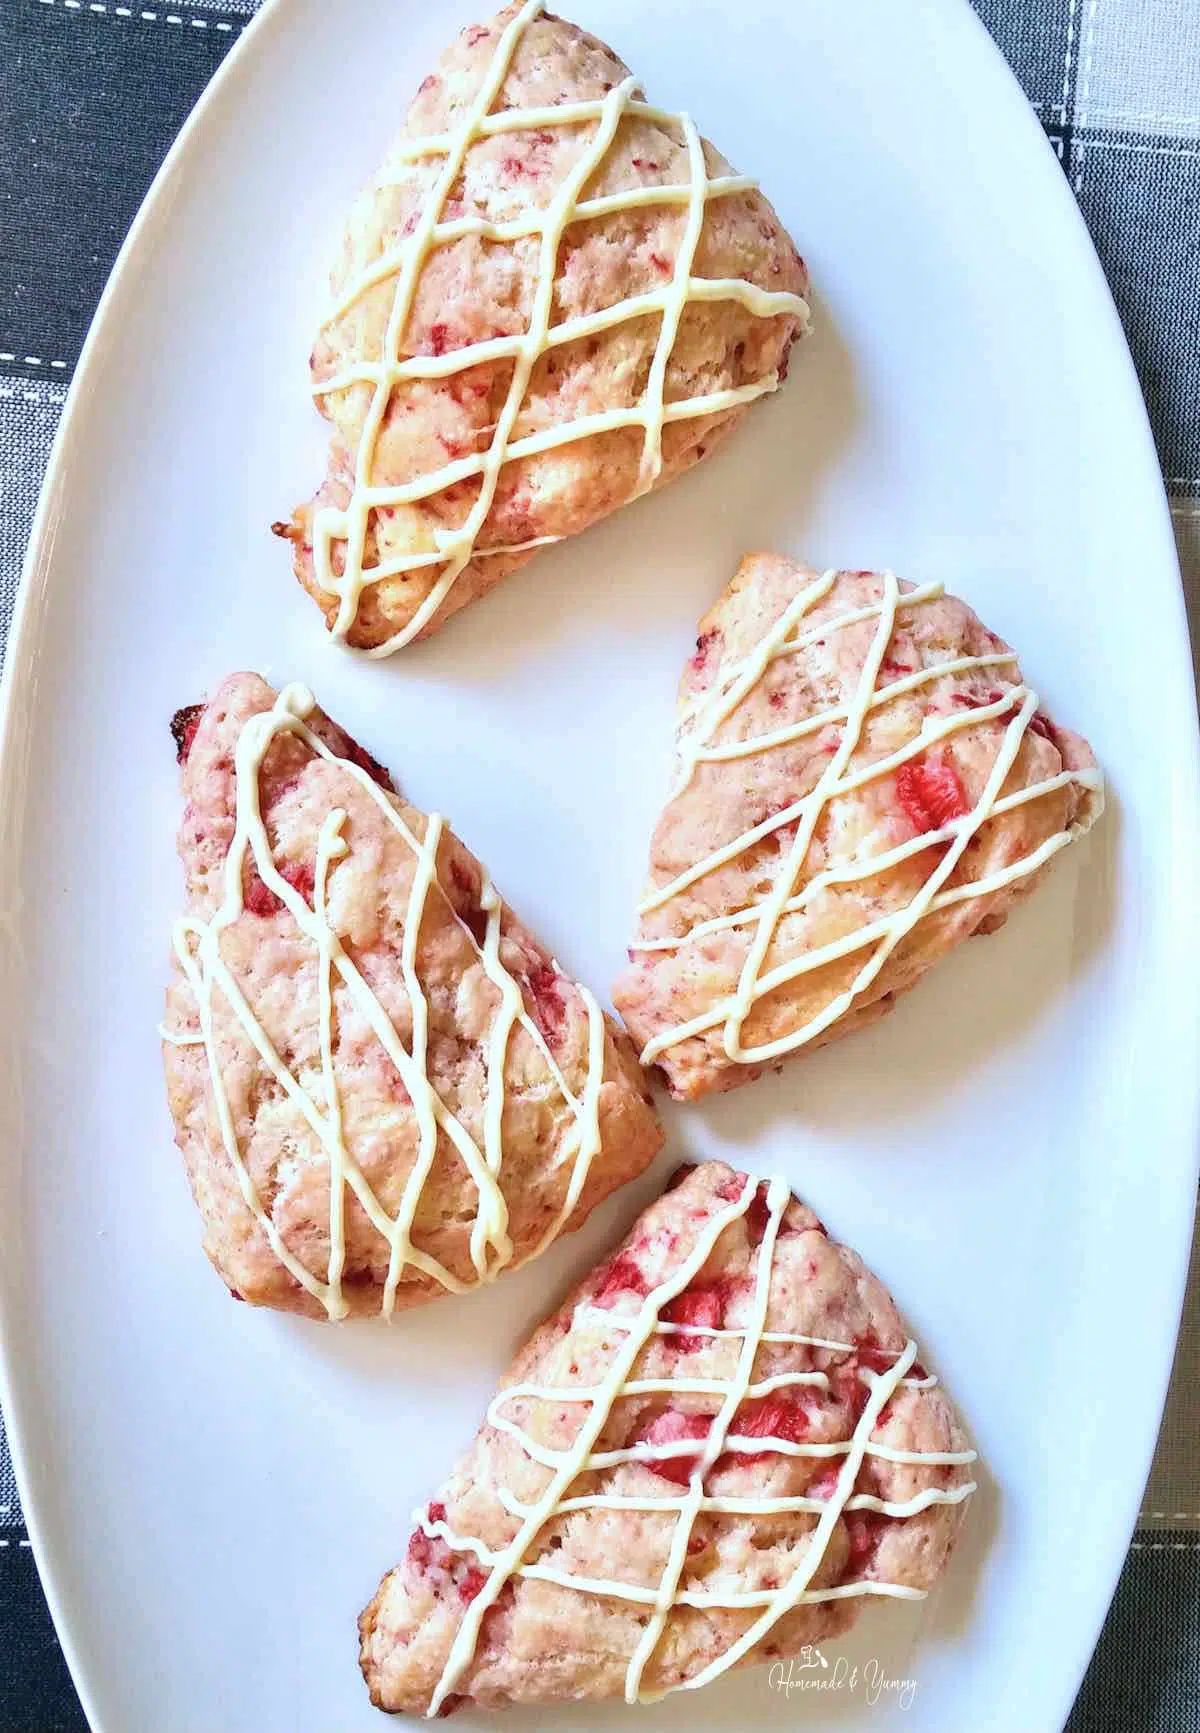 Strawberry scones drizzled with white chocolate.